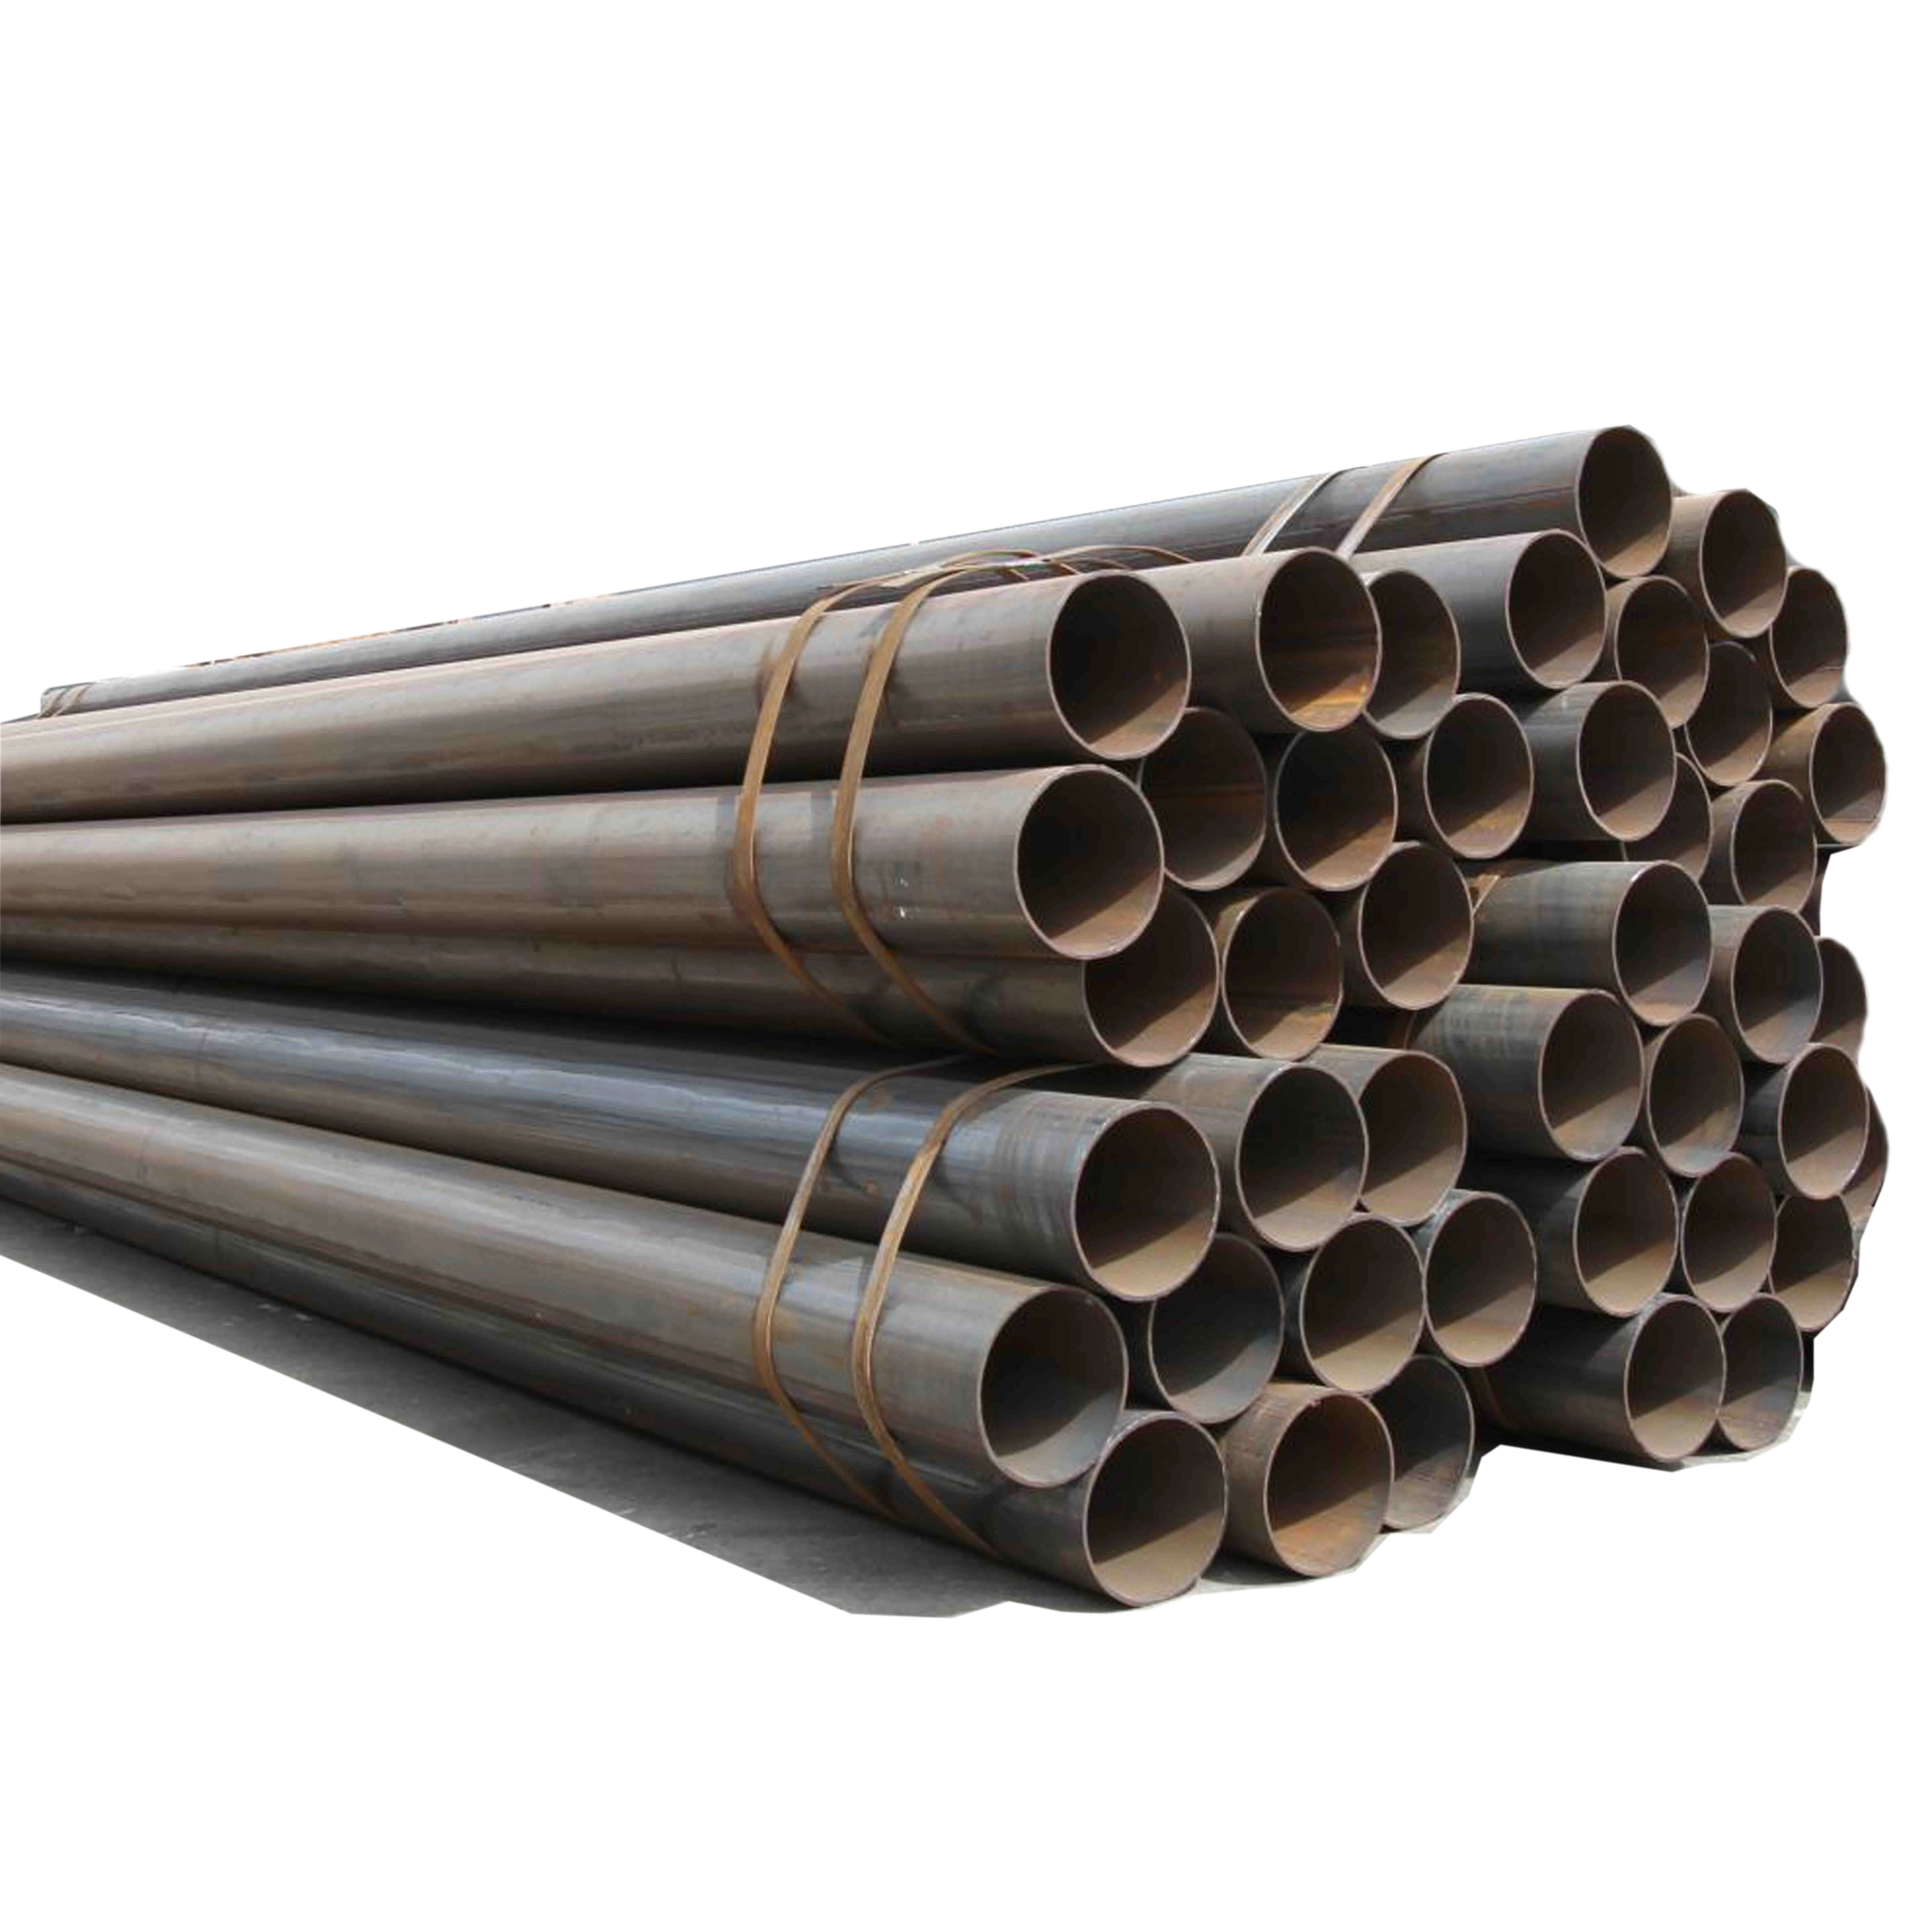 q195 q235 4 inch astm standards socket thread carbon a53 grade a erw weld black tube steel pipe list with oil